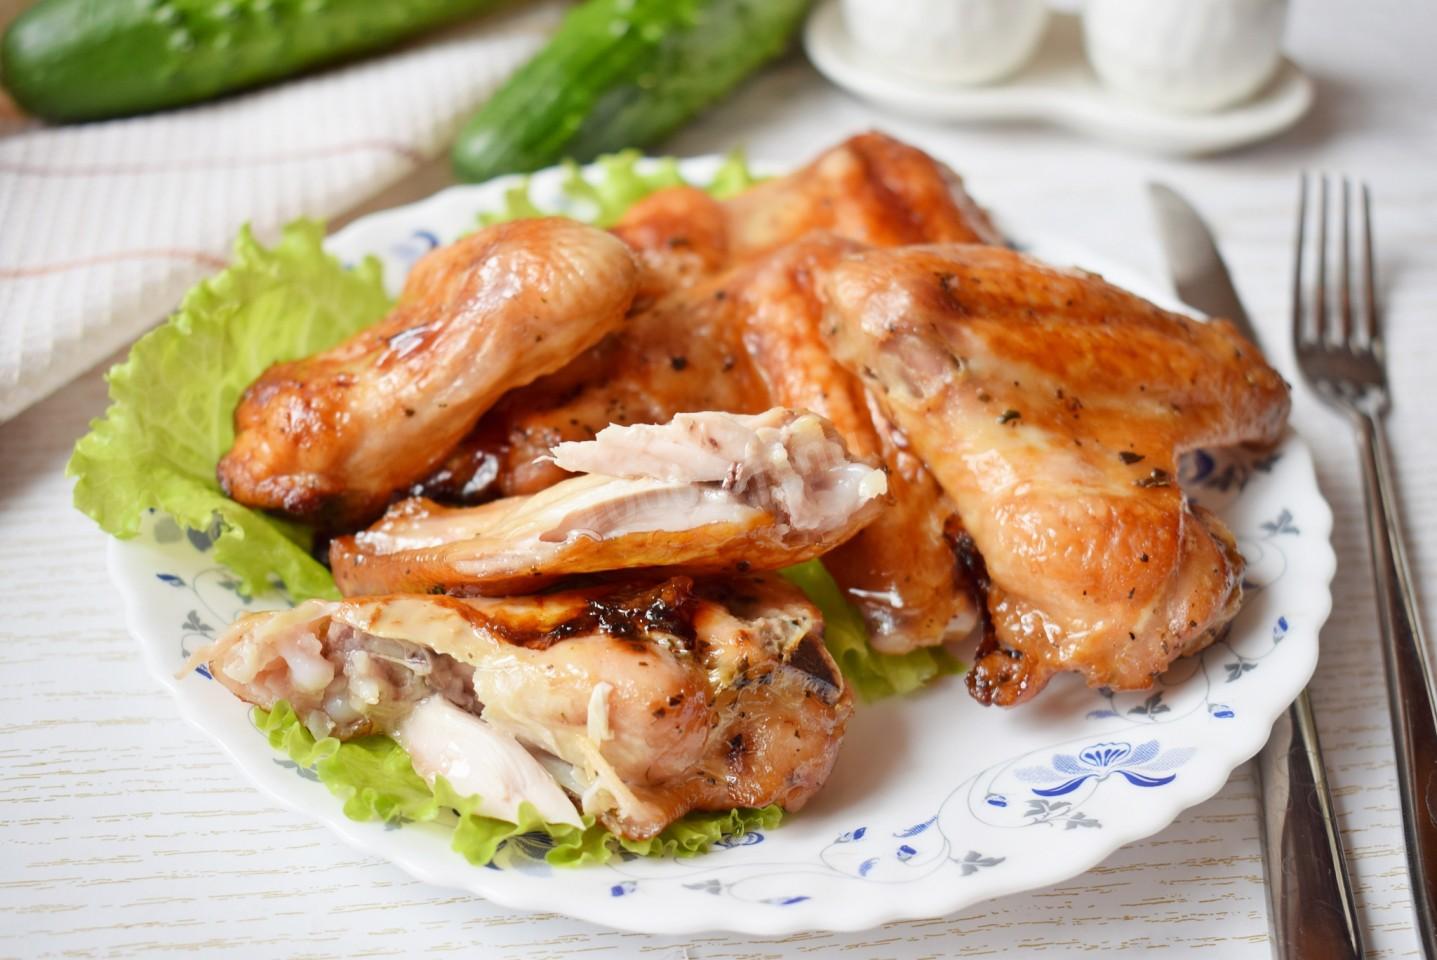 chicken wings in honey and soy sauce - 7